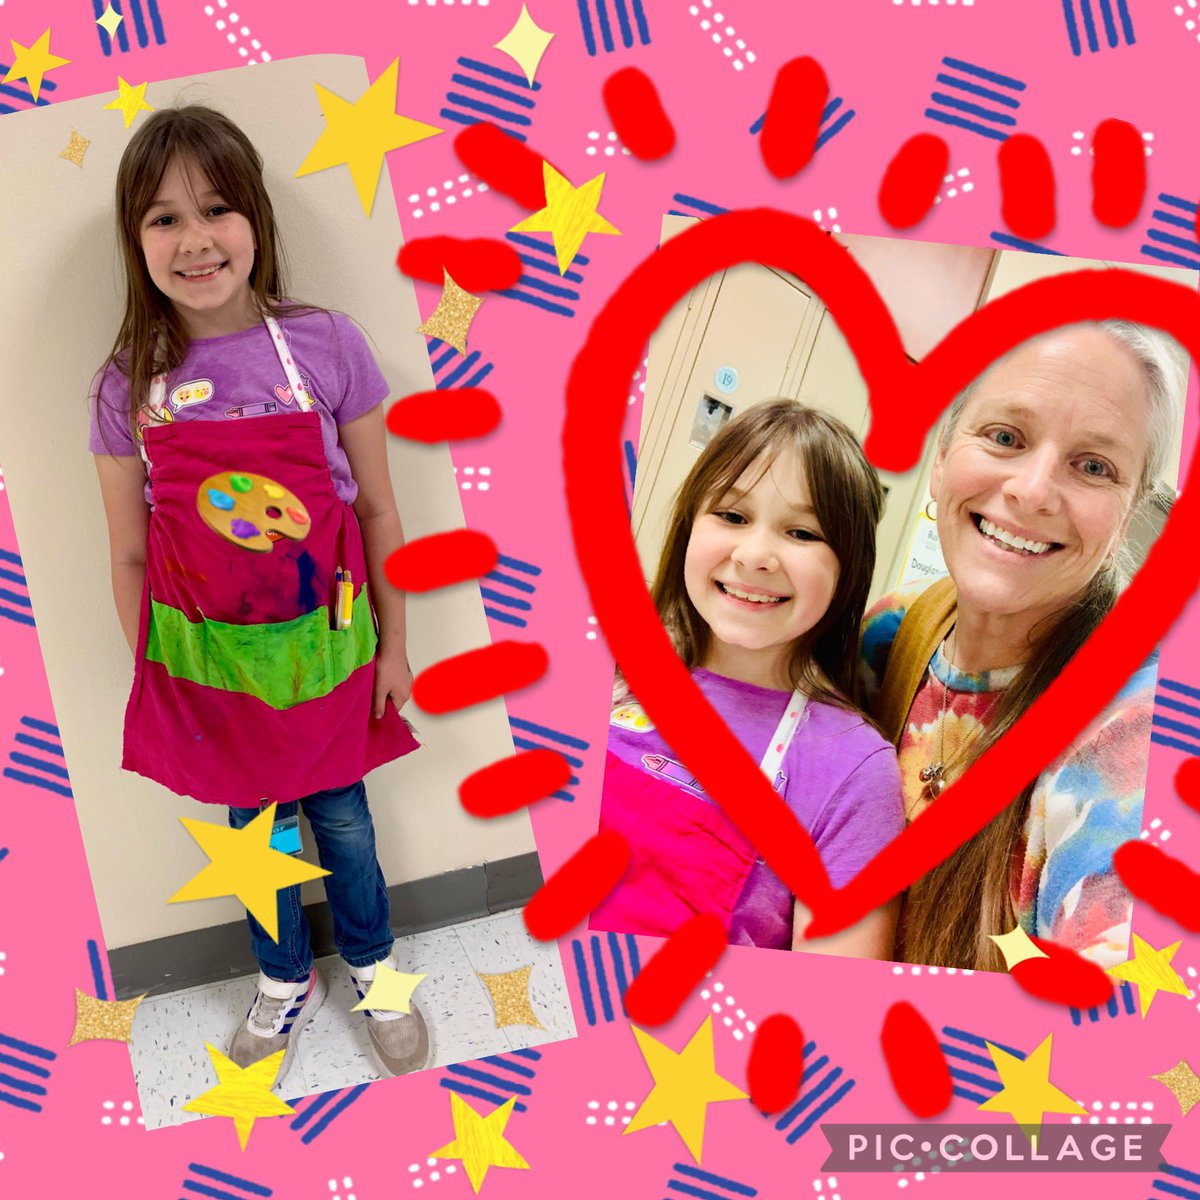 I’m humbled flattered and totally love this art smarty❤️💛💙🎨 Dress as a teacher day☺️ #ArtSmart She’s going to SHINE BIG no matter what she does! Heart of 💛